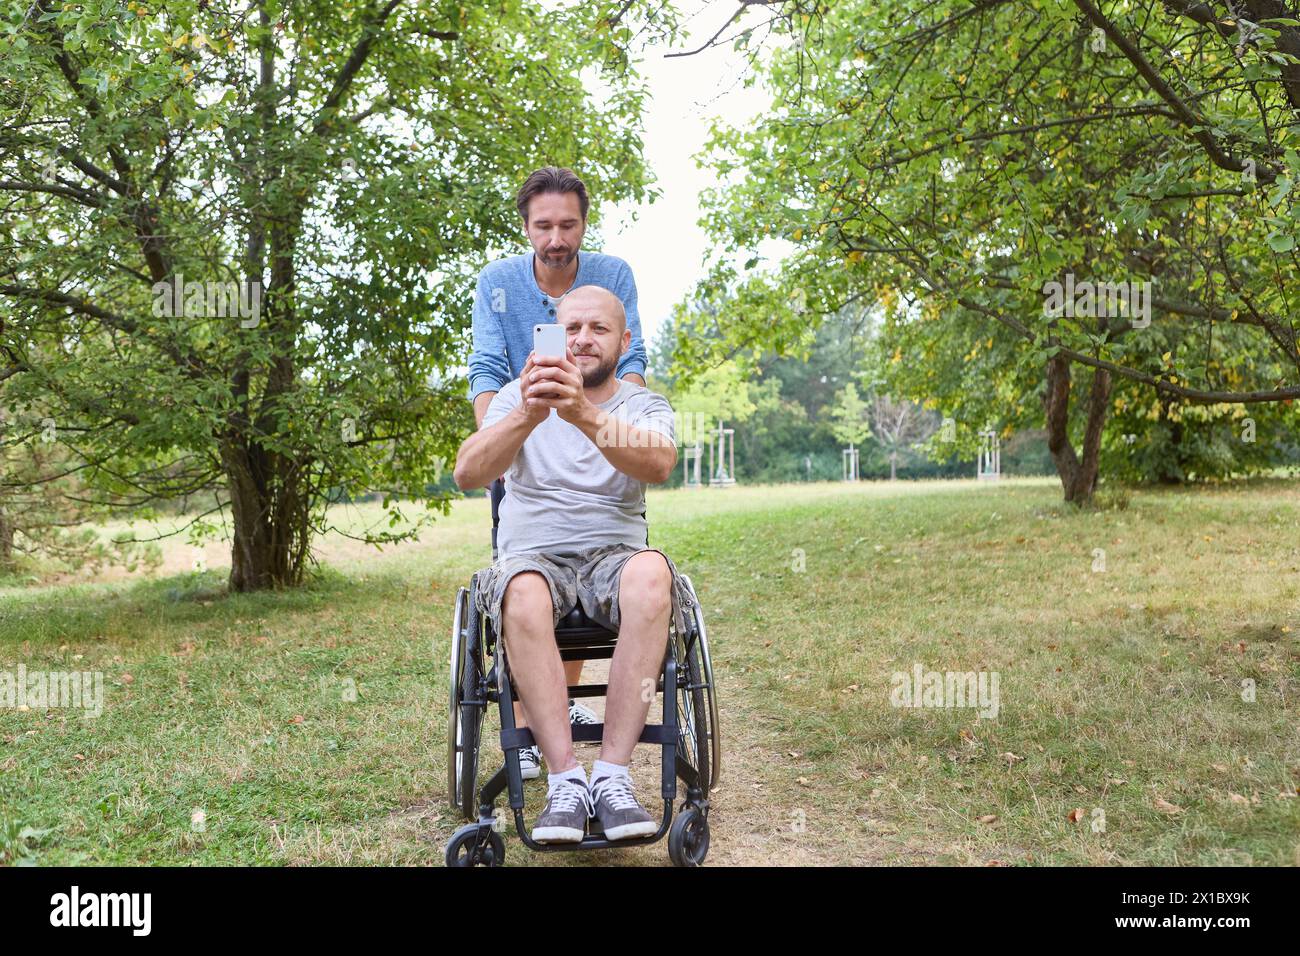 A person who uses a wheelchair and companion share a moment, taking a selfie together in a serene park setting. Stock Photo